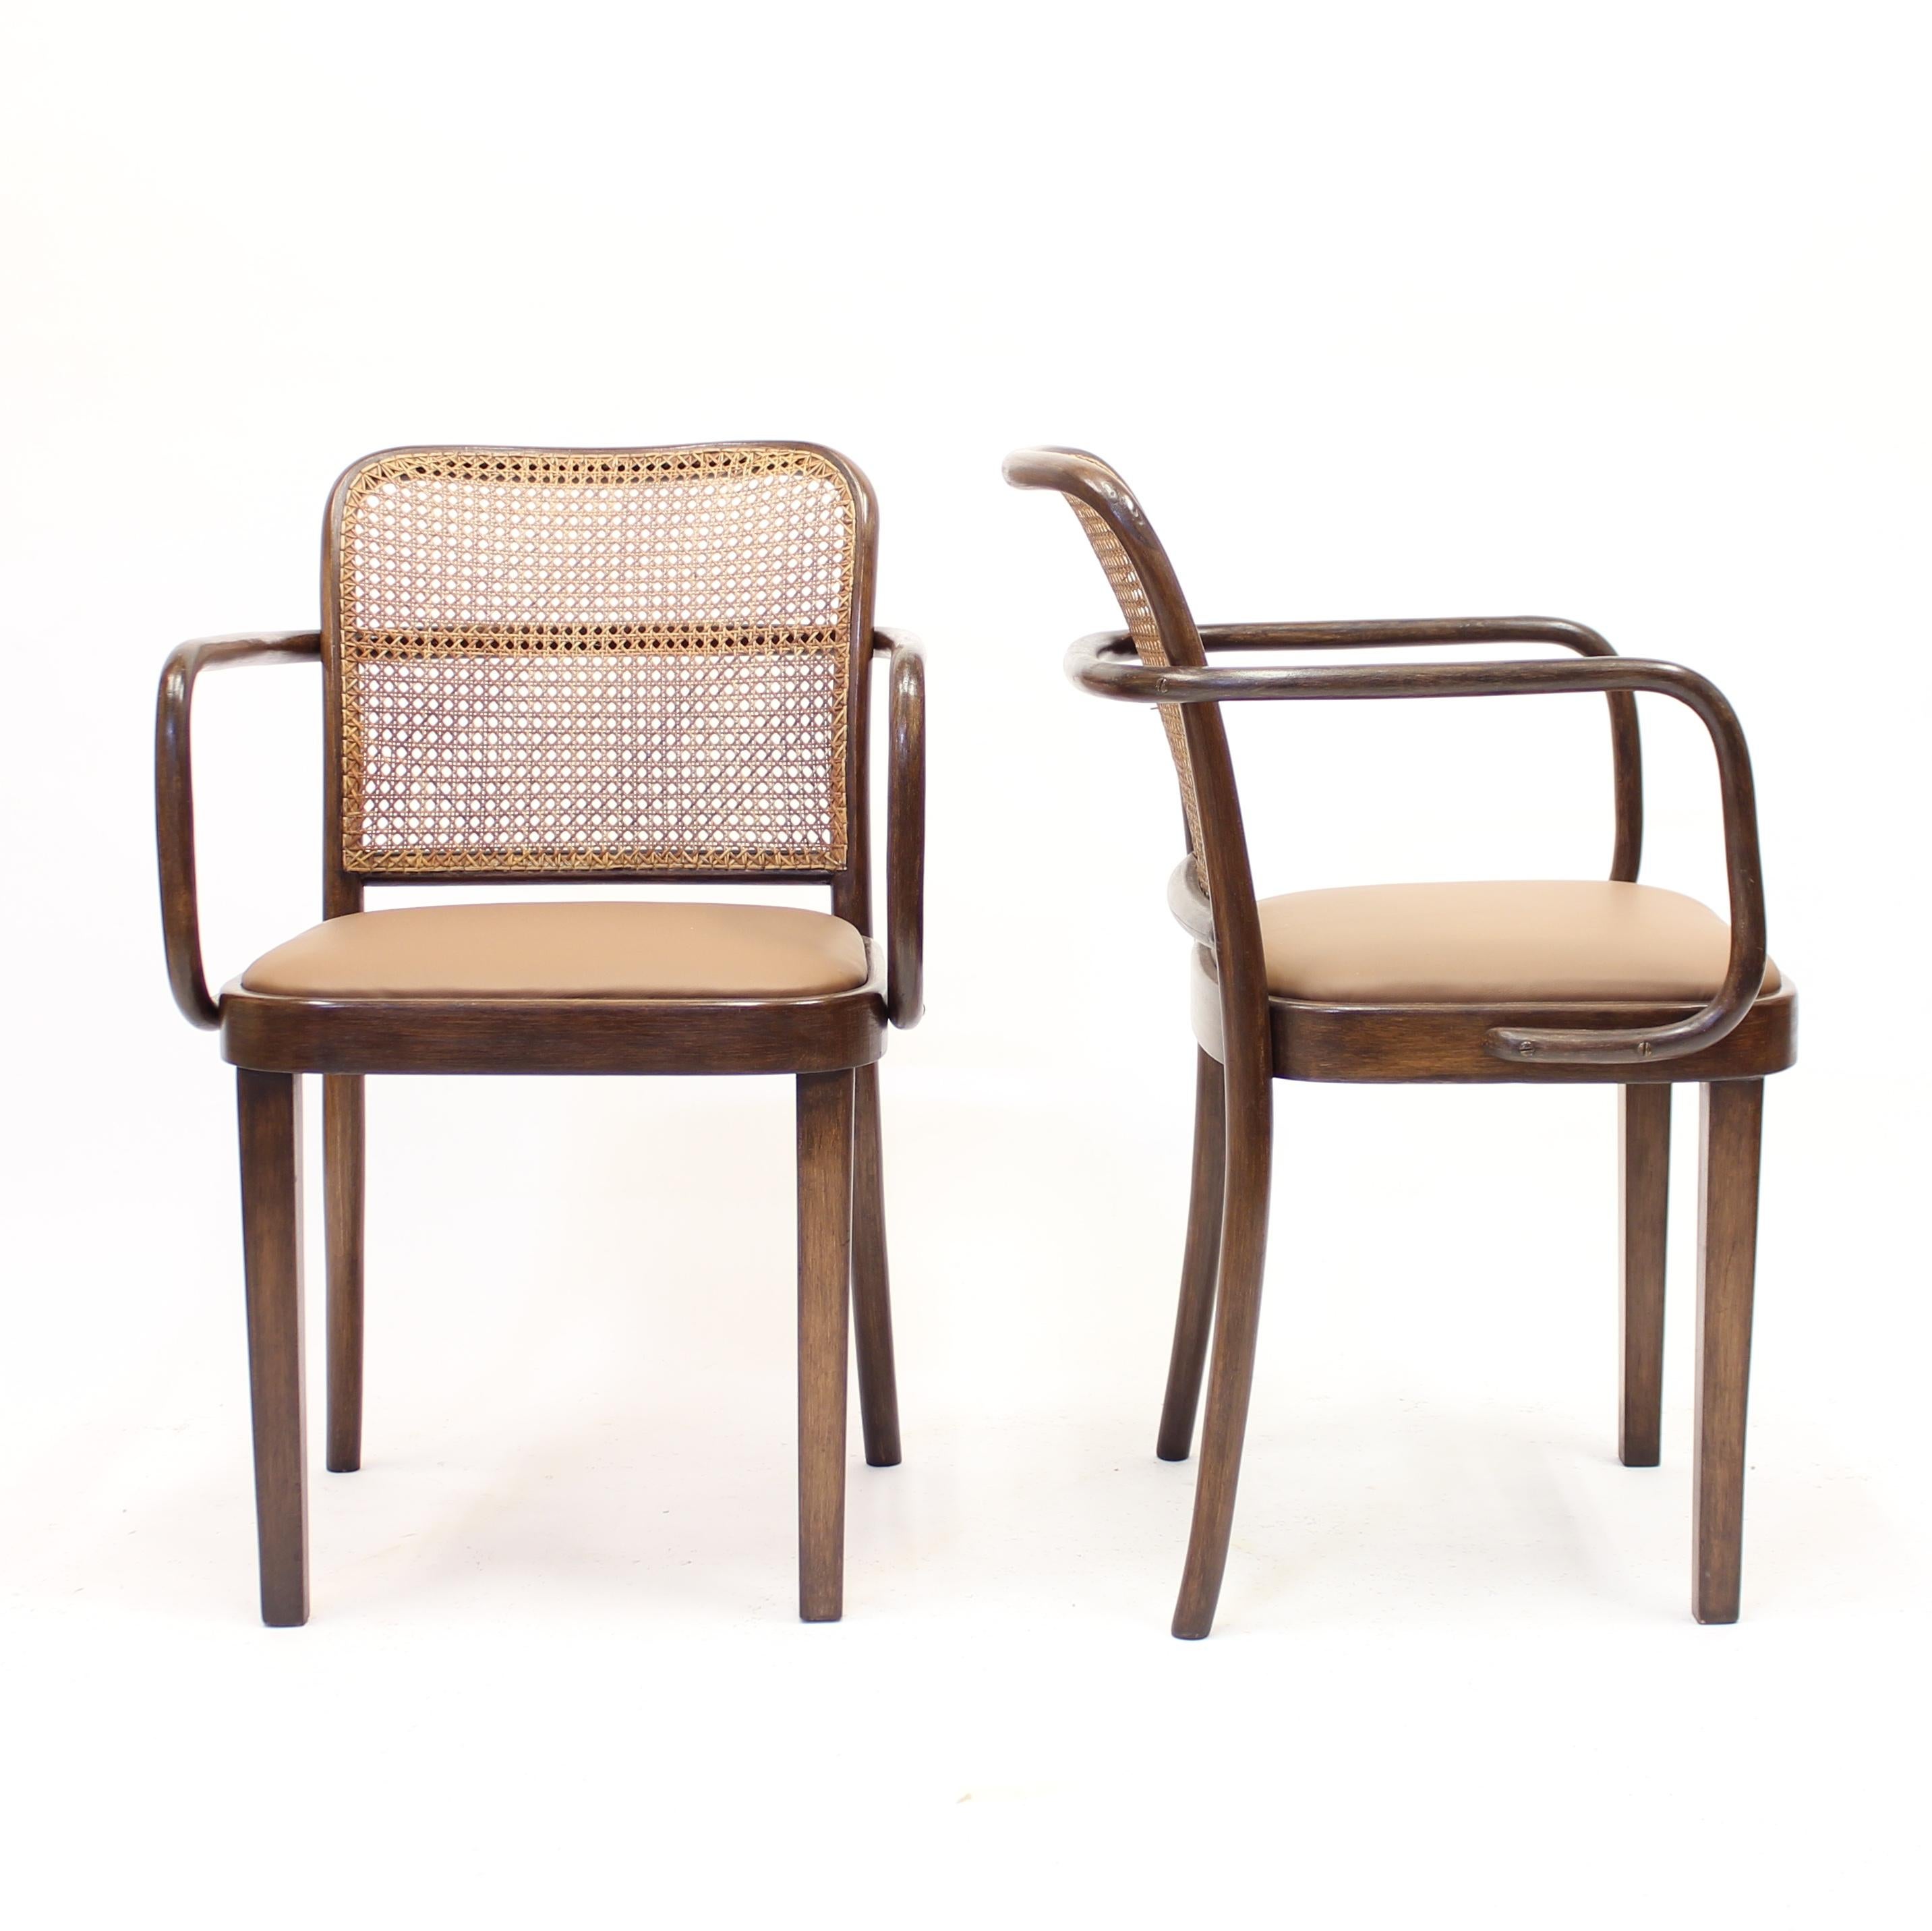 Mid-20th Century Josef Frank/Josef Hoffmannn, Pair of Armchairs Model A 811/1 F for Thonet, 1930s